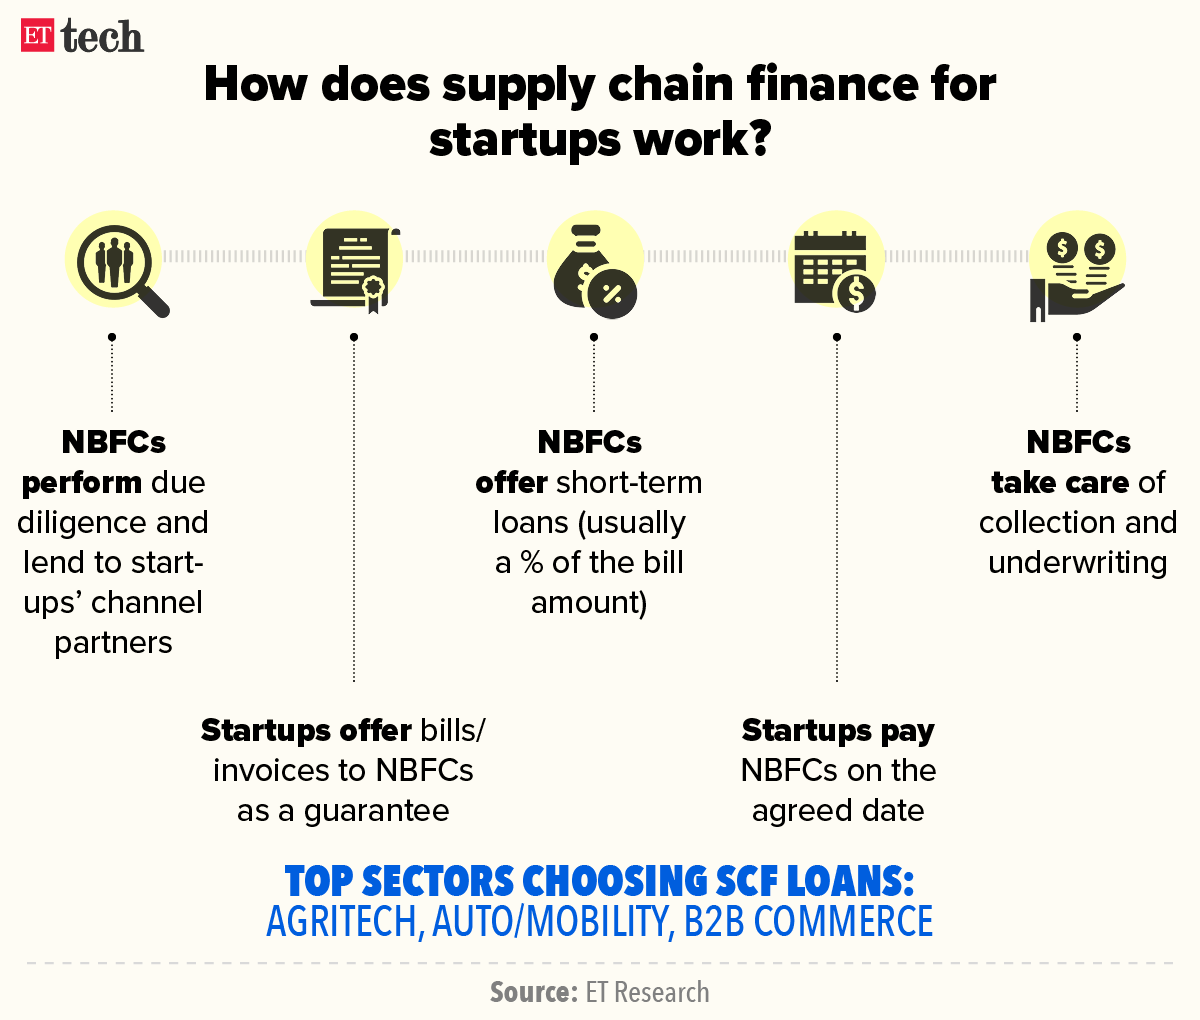 How does supply chain finance for startups work